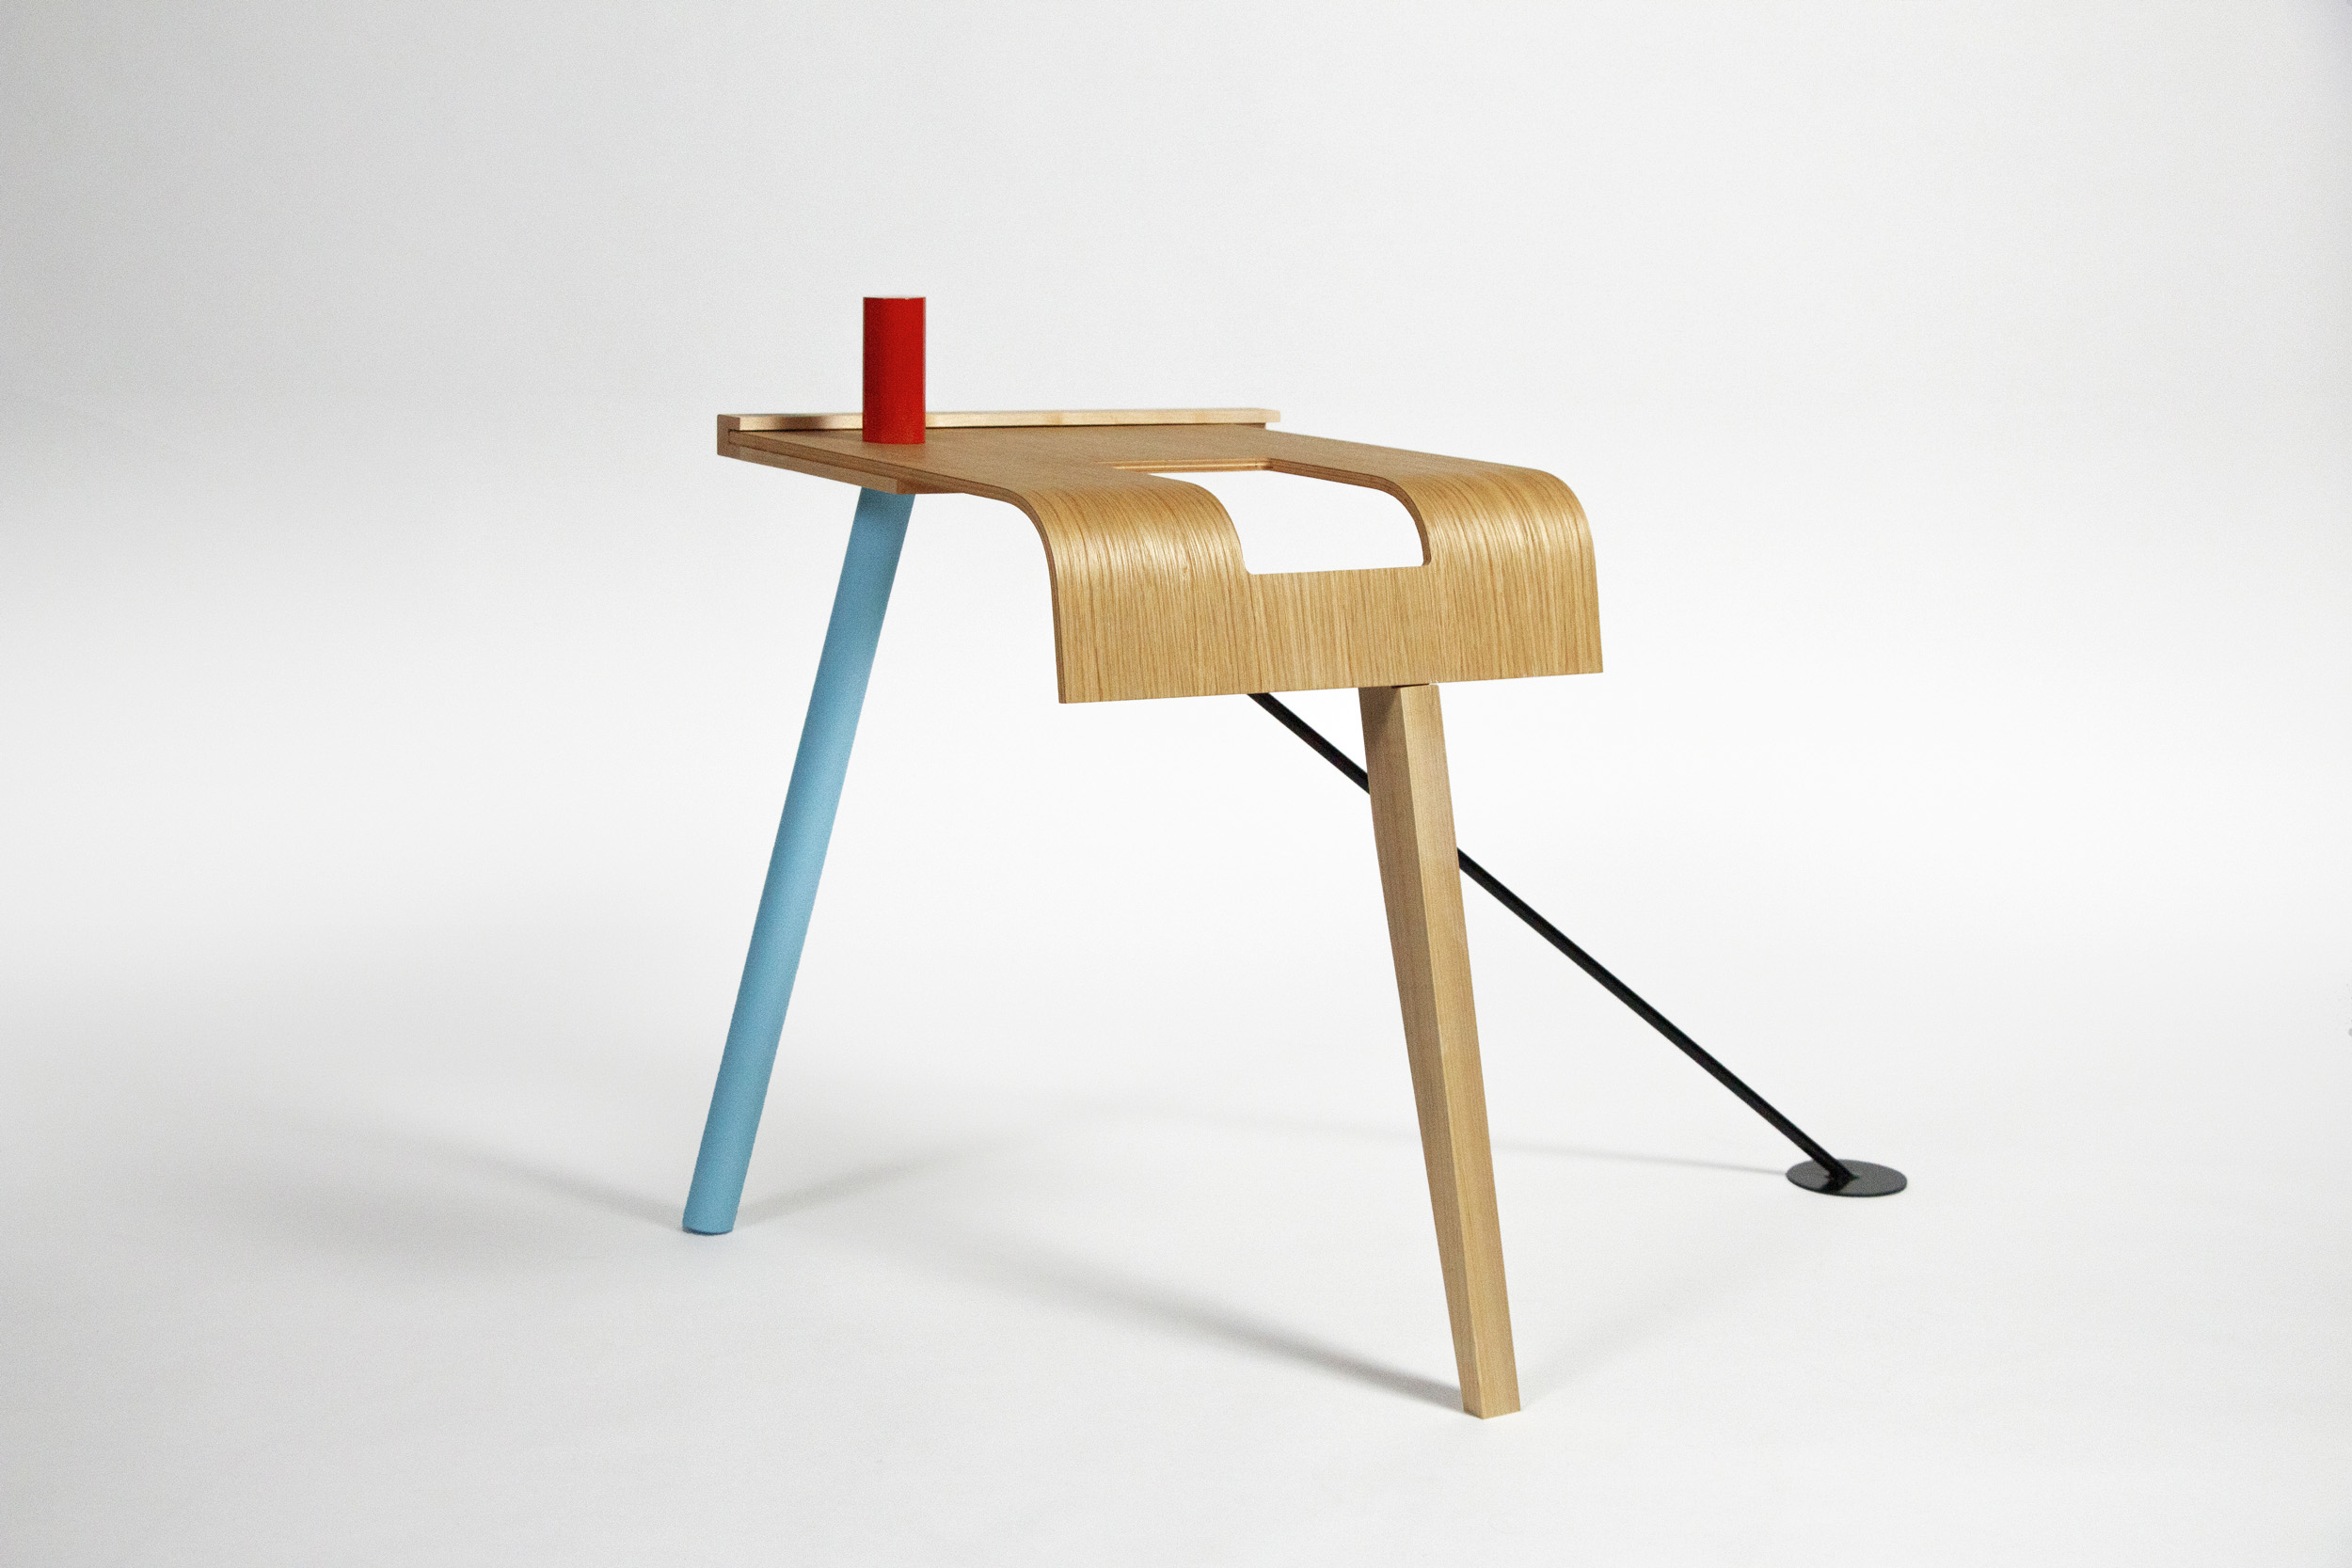 100% Chair: Designing for Algorithmic Landscapes - 78.2% Chair